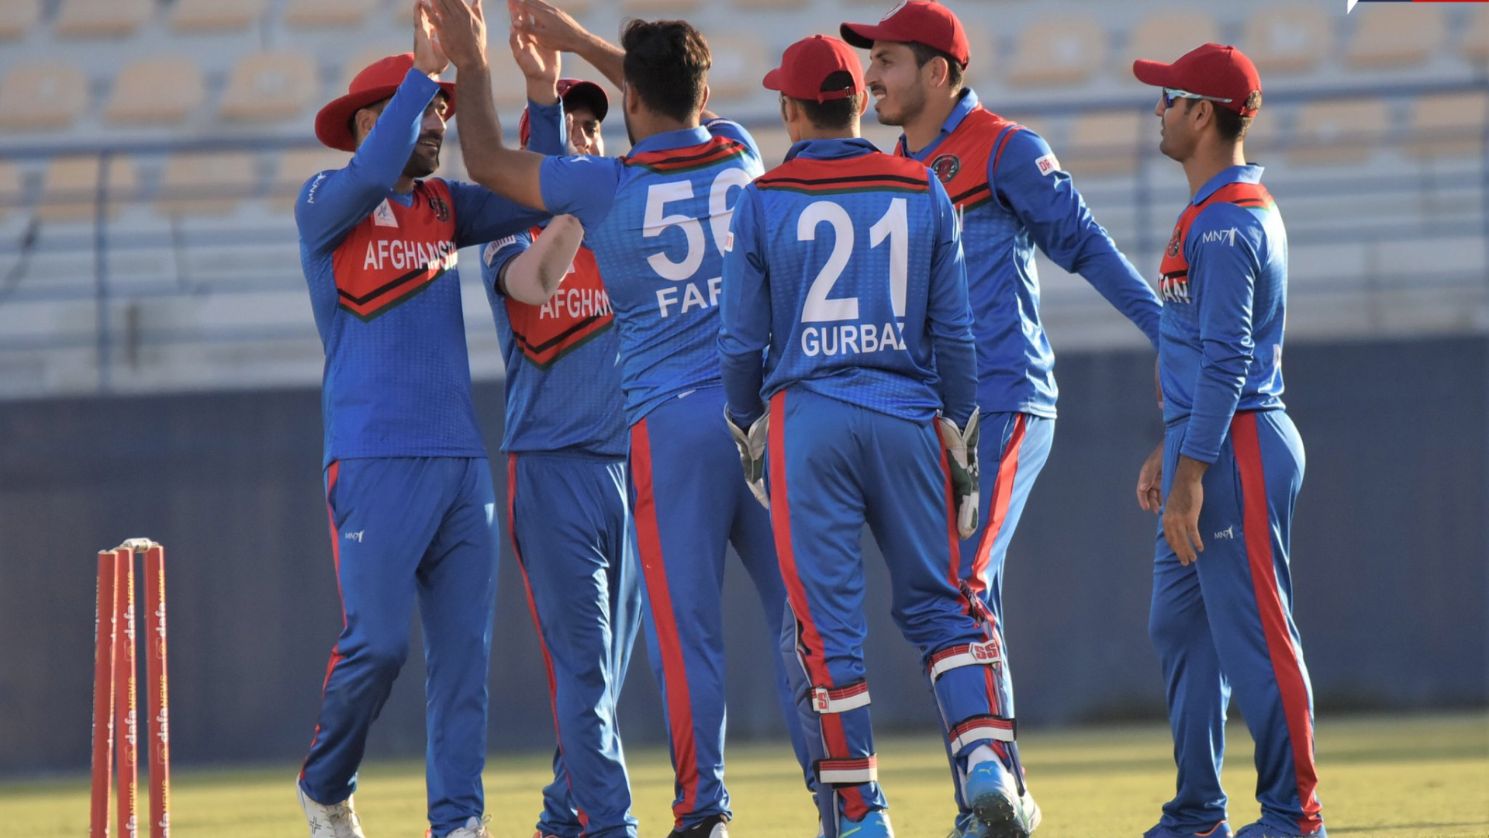 AFG vs NED | 2nd ODI: Afghans write the same script of the Dutch demise, take unassailable lead